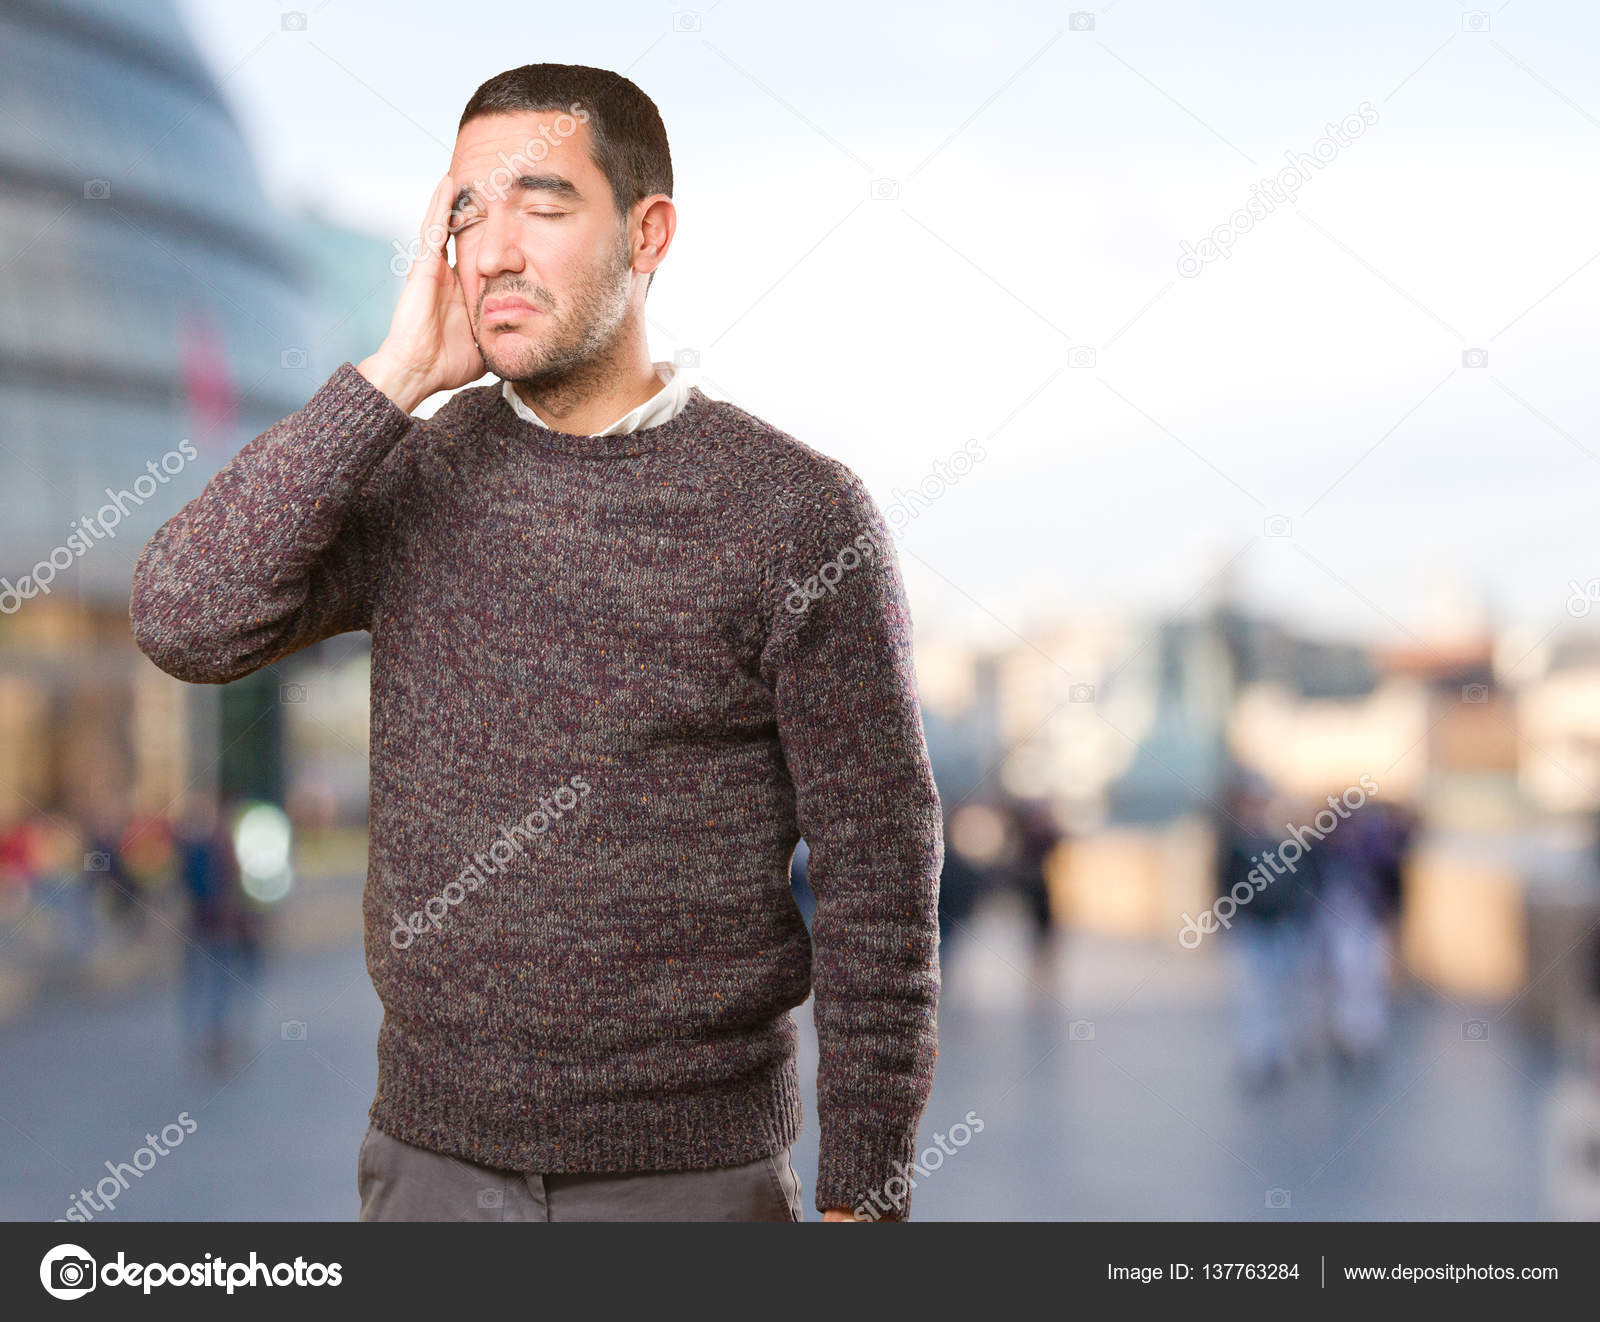 Stressed young man posing — Stock Photo © agongallud #137763284